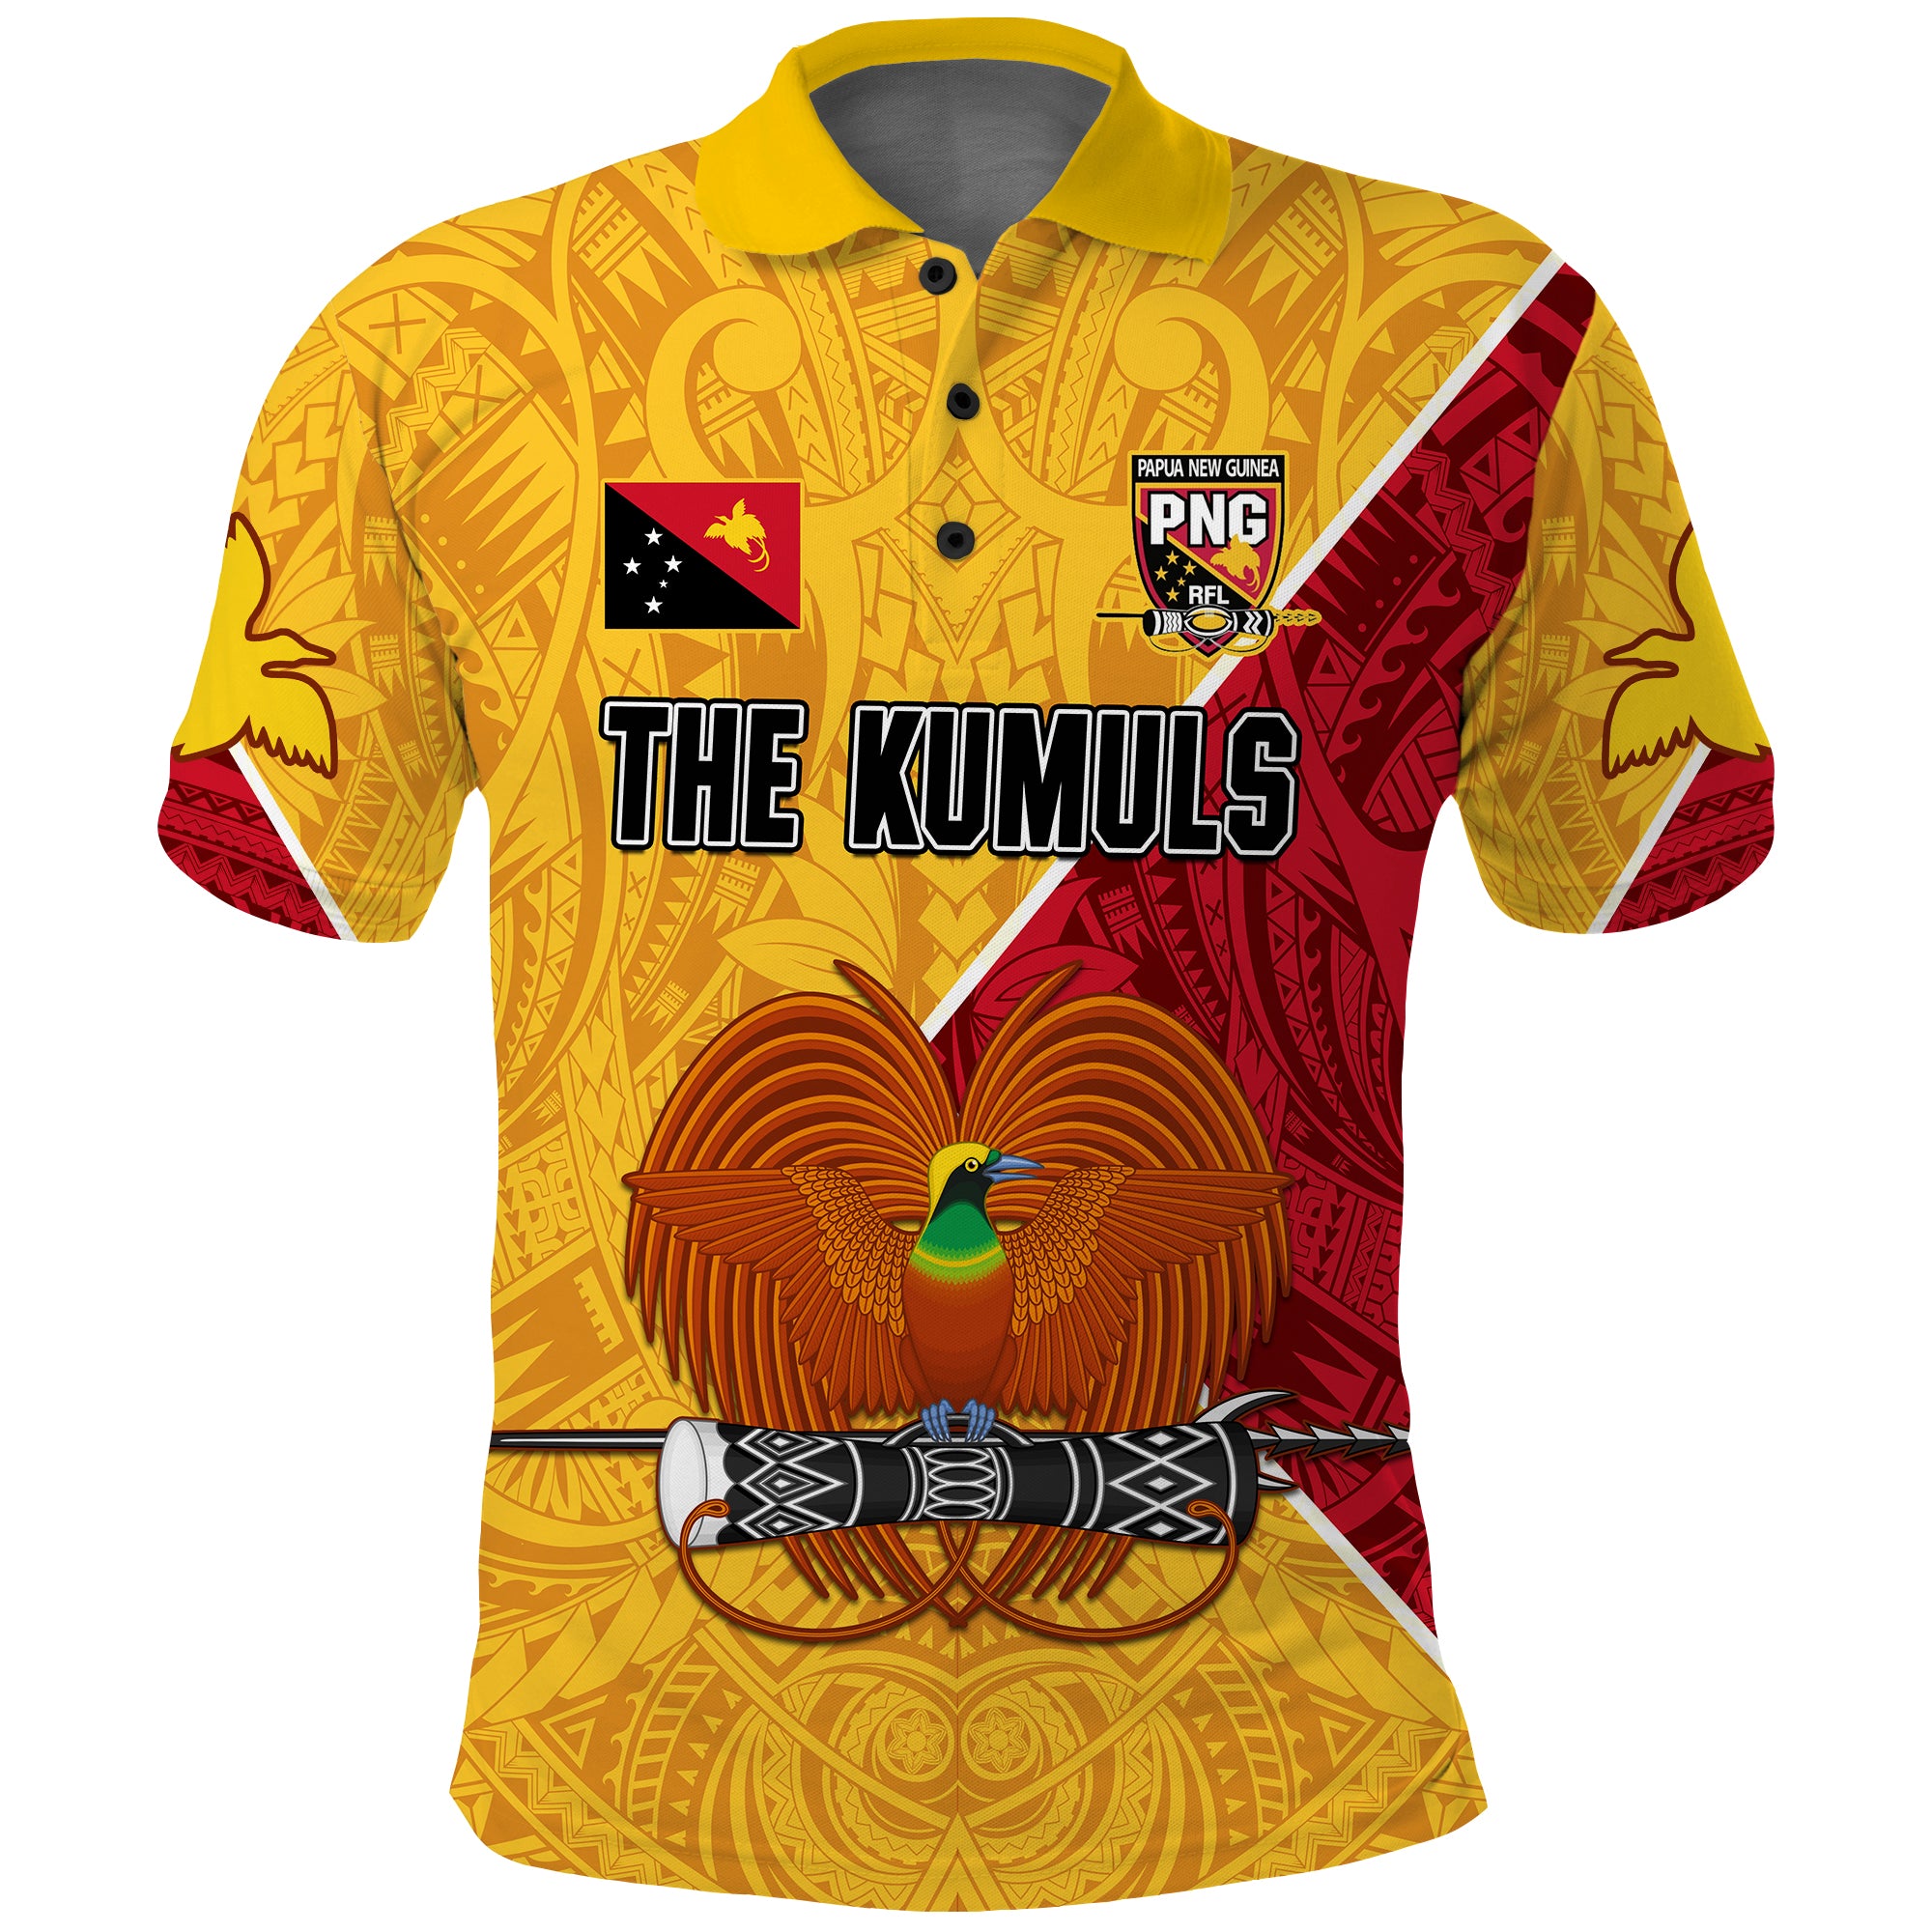 The Kumuls PNG Polo Shirt Papua New Guinea Polynesian Dynamic Style LT14 Adult Yellow - Polynesian Pride